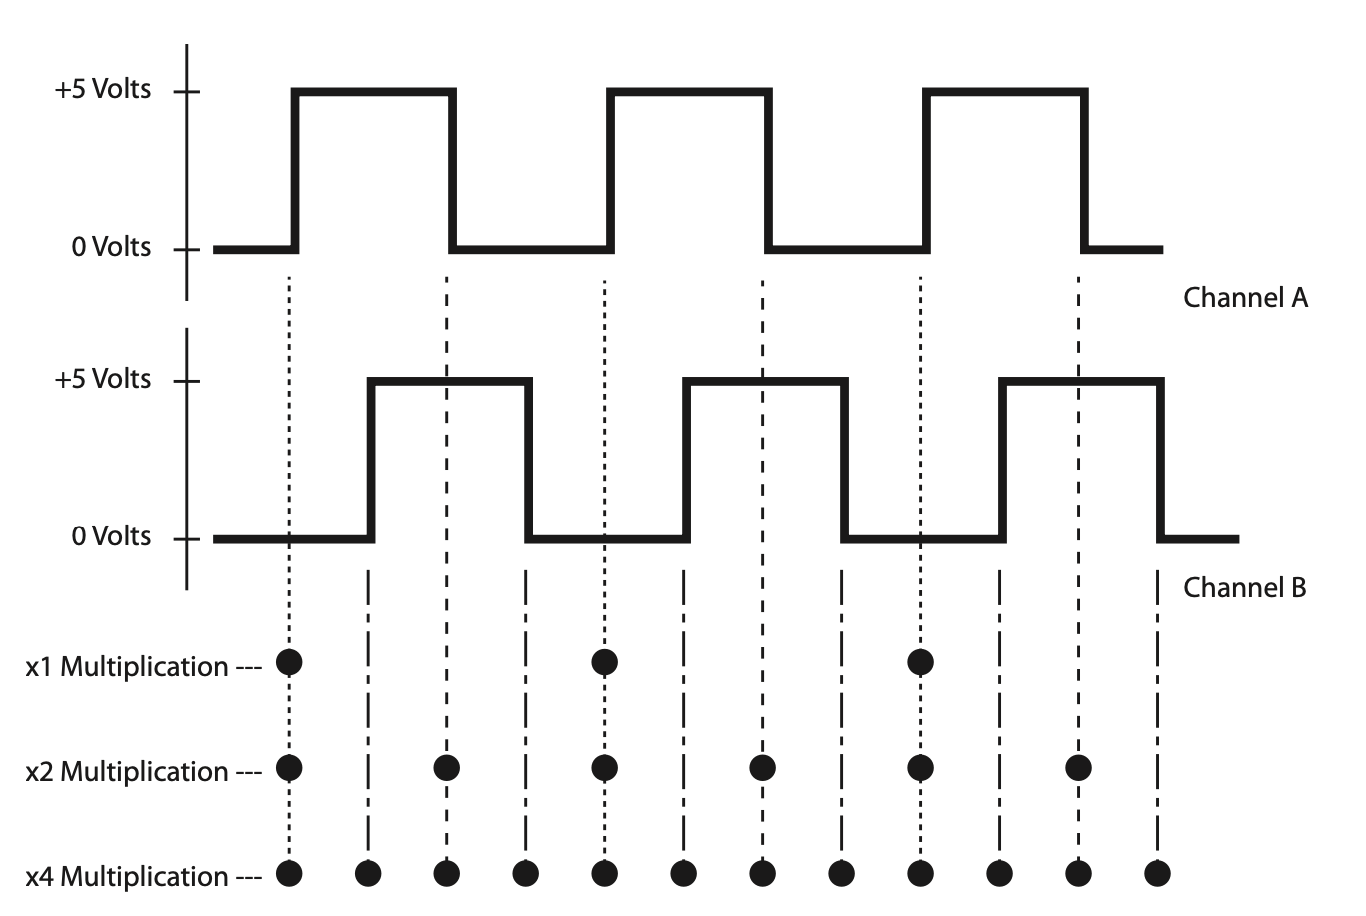 Chart illustrating that you can get up to 4x multiplication using offset waveforms from Channels A and B